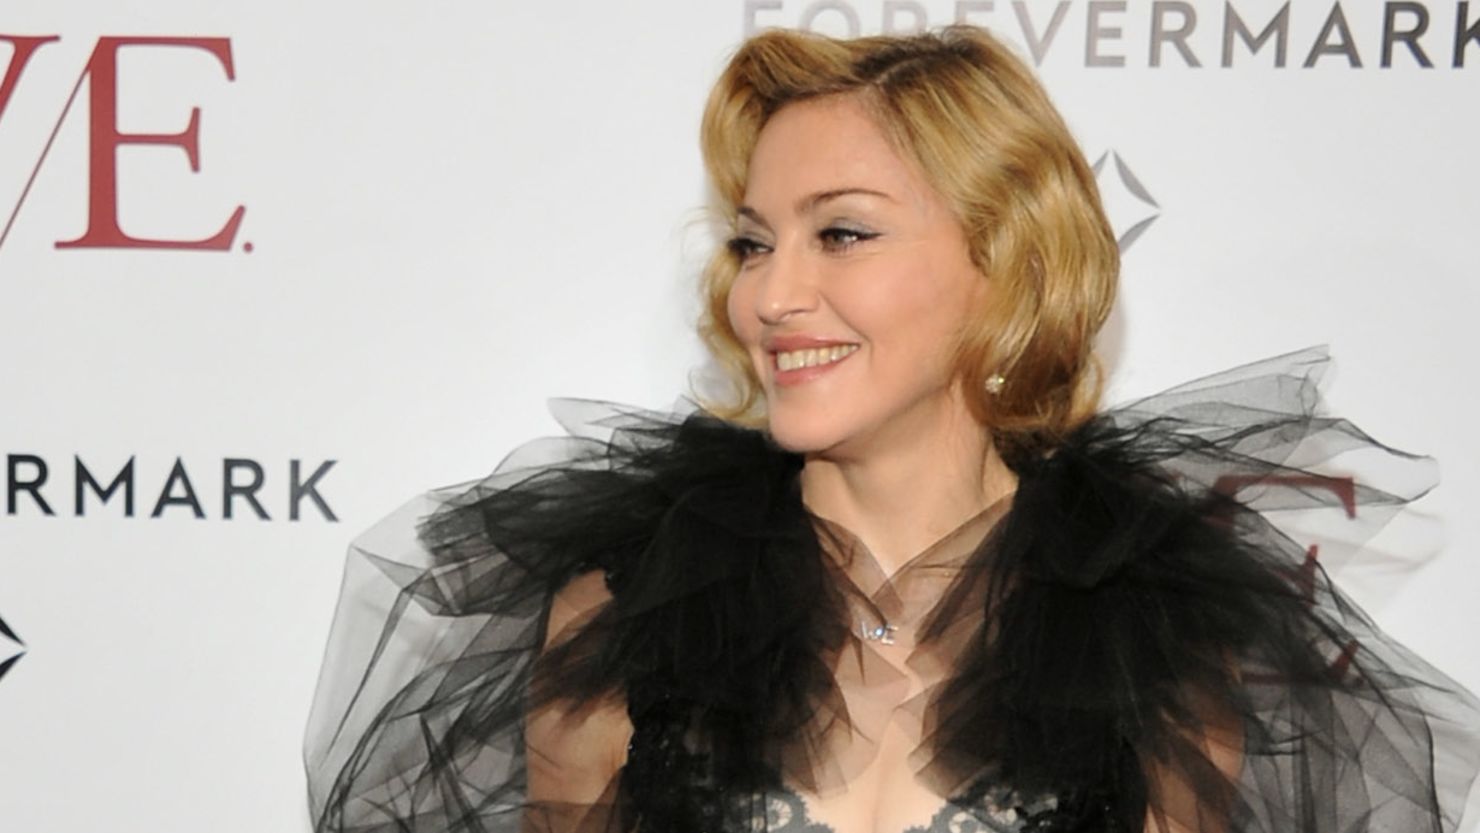 Madonna will premiere the video for the first single from her new album MDNA on Thursday.